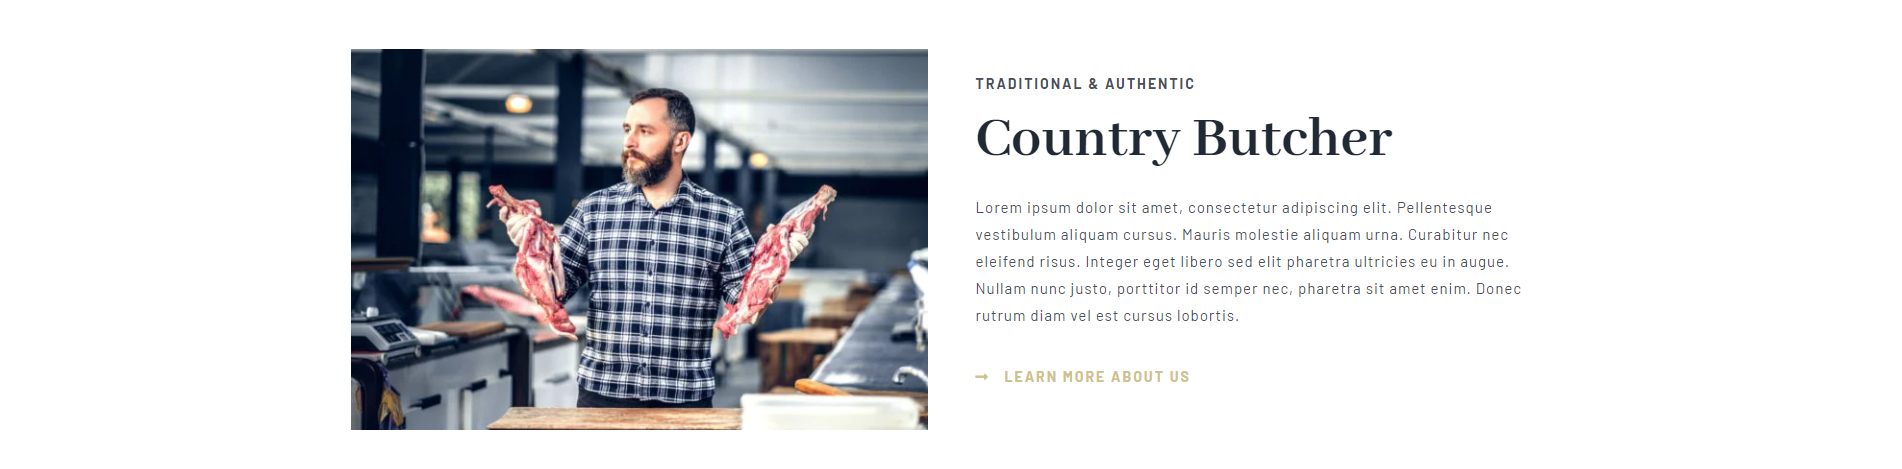 Country Butcher Introduction